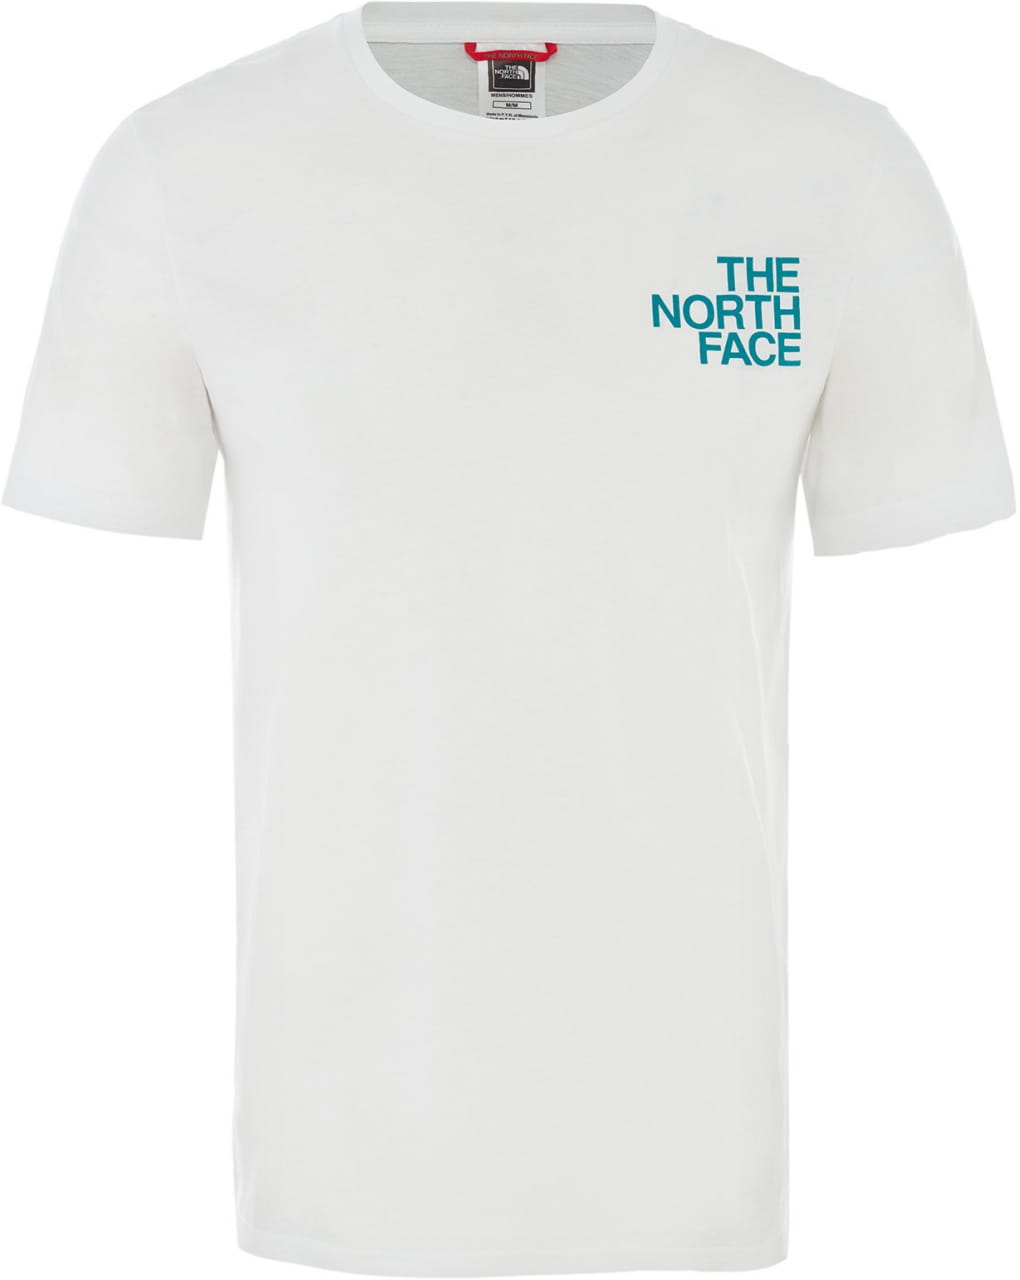 T-Shirts The North Face Men's Graphic Flow 1 T-Shirt